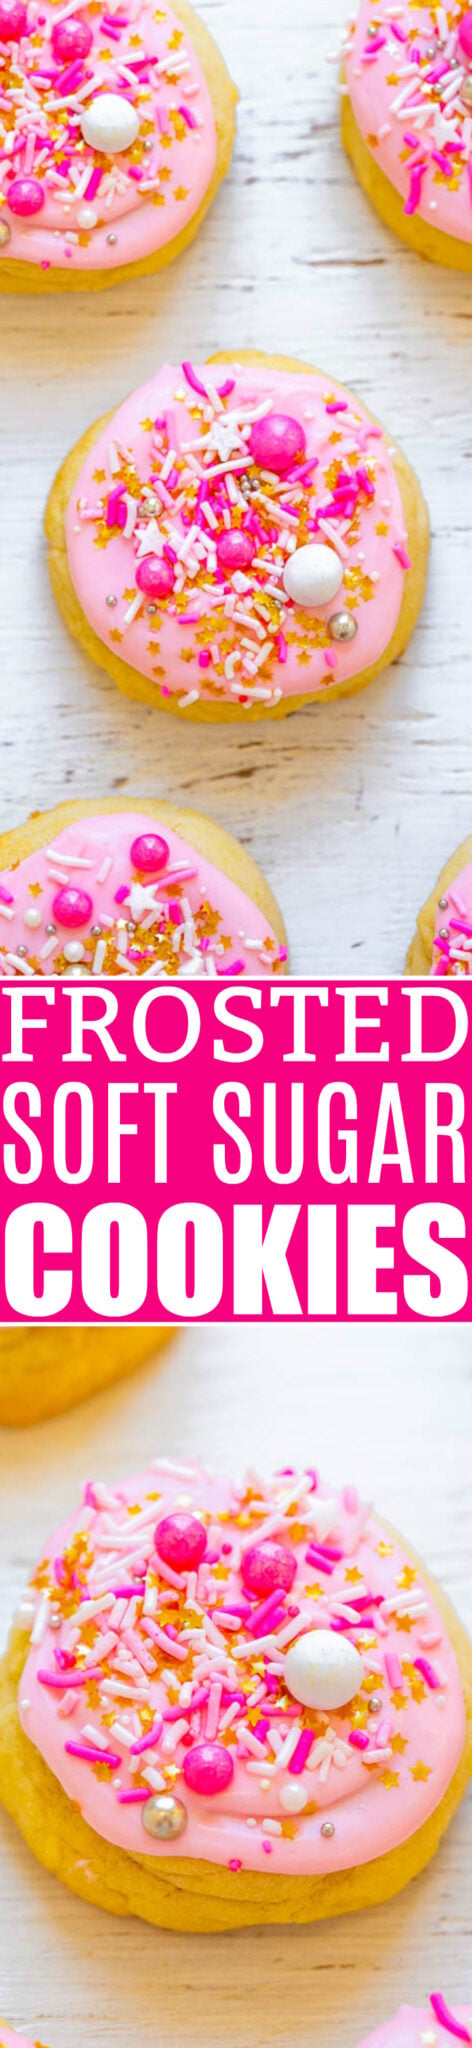 Frosted Soft Sugar Cookies - Super SOFT sugar cookies that just melt in your mouth!! If you've ever thought that sugar cookies can be boring or dry, this EASY recipe with frosting and sprinkles will change your mind! Absolutely DELISH!!